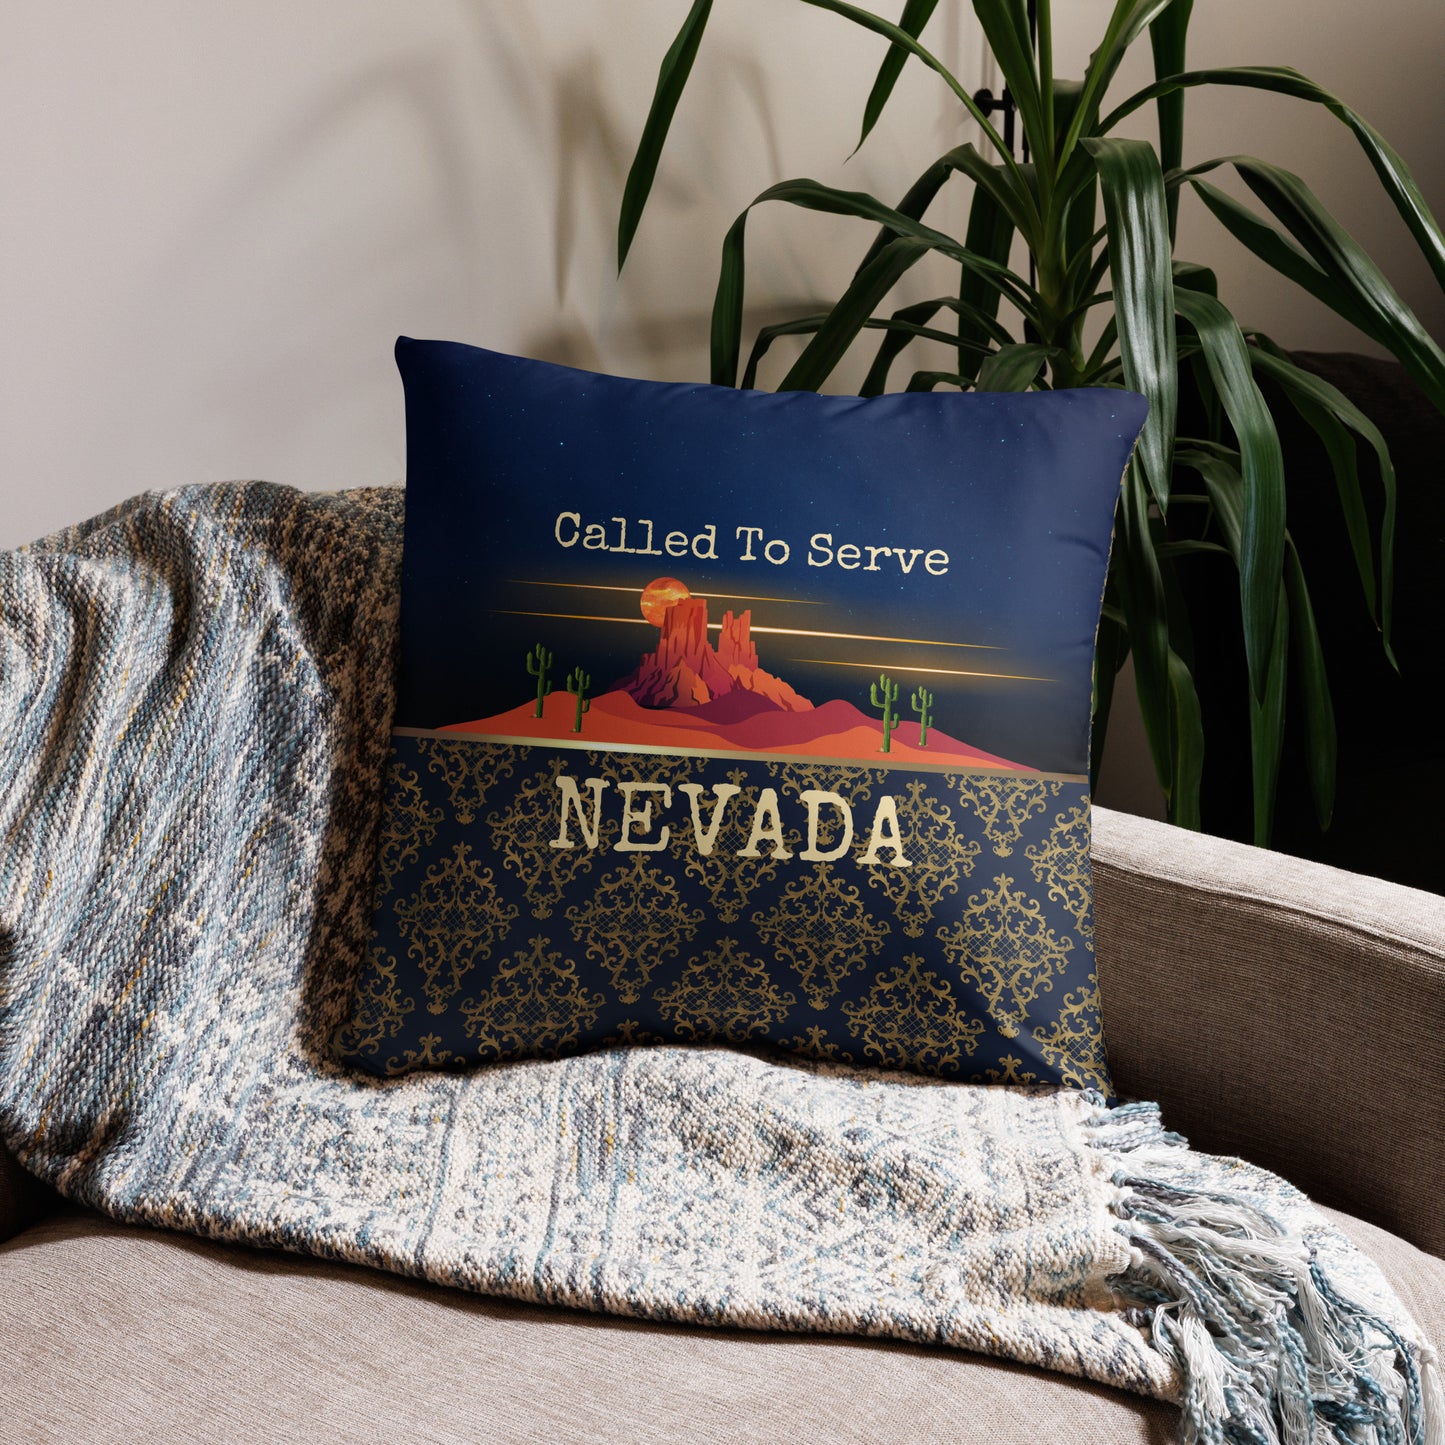 Nevada Missionary Gift #2 | Best Missionary Gift Ideas | Mission Call Gifts | Called to Serve Gifts | Missionary Mom Gifts | Best Latter Day Saint Gifts | LDS Missionary Gifts | Nevada Home Decor